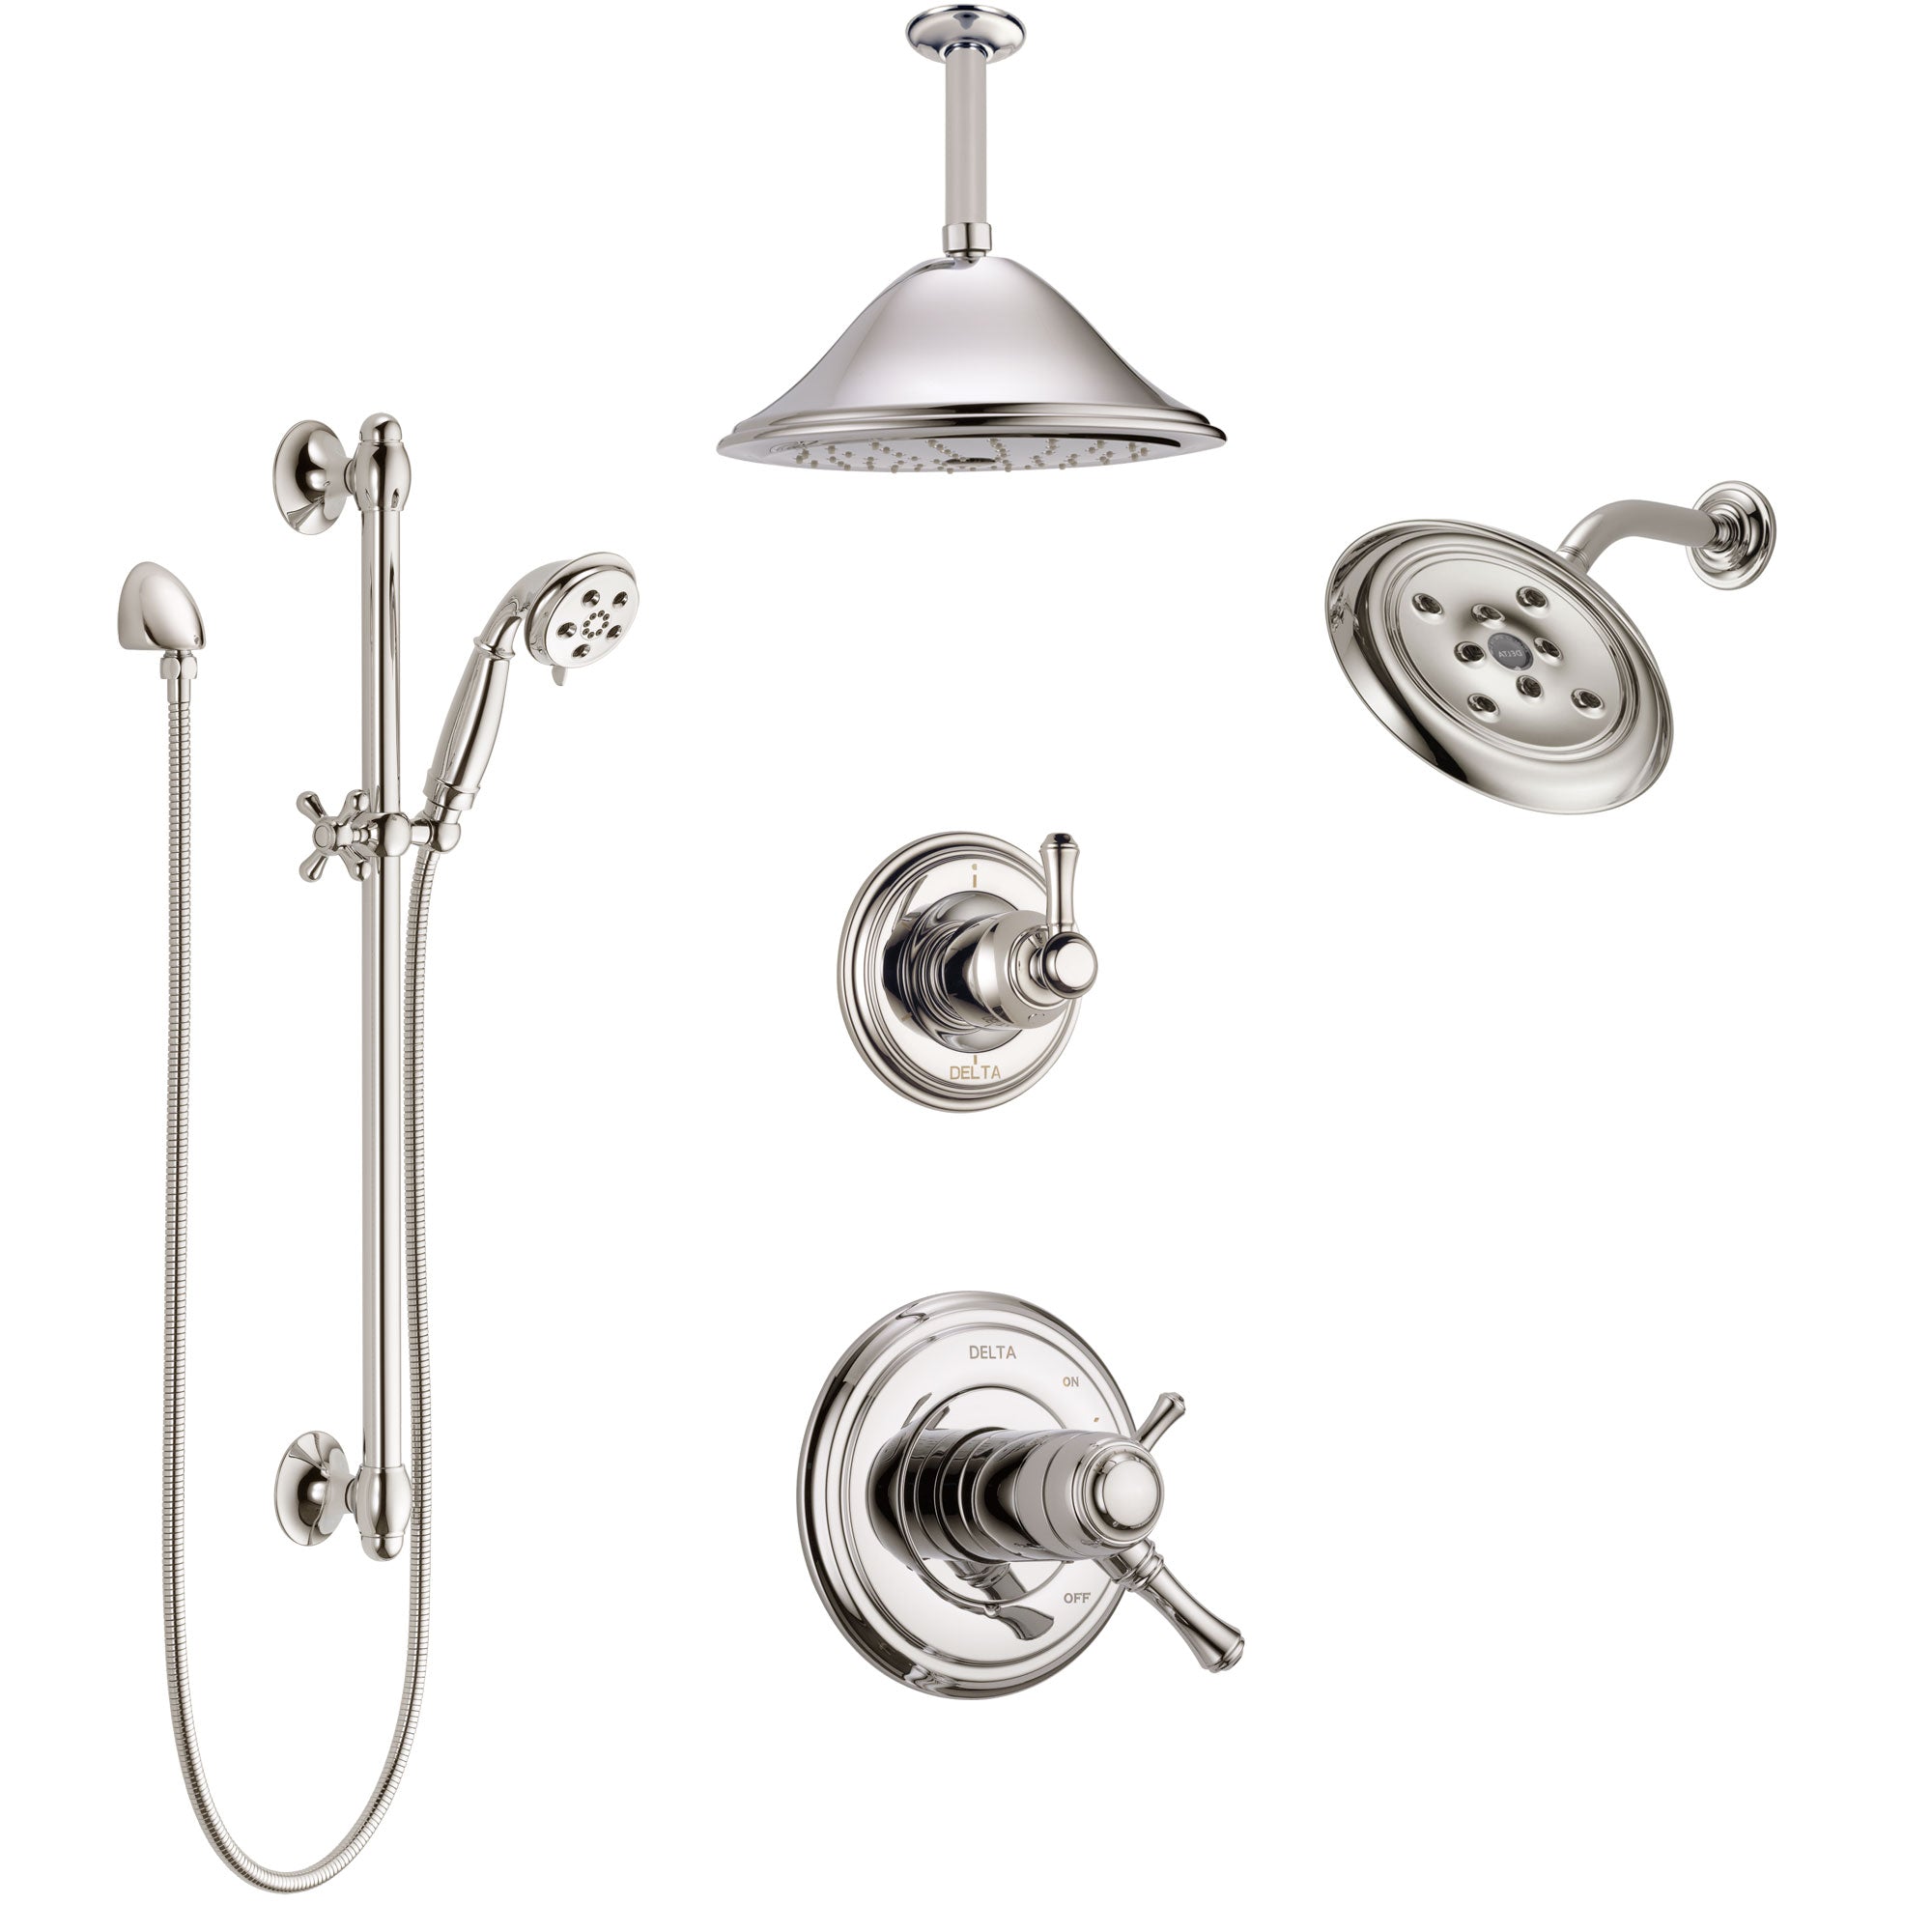 Delta Cassidy Polished Nickel Shower System with Dual Thermostatic Control, Diverter, Showerhead, Ceiling Showerhead, and Hand Shower SS17T971PN6